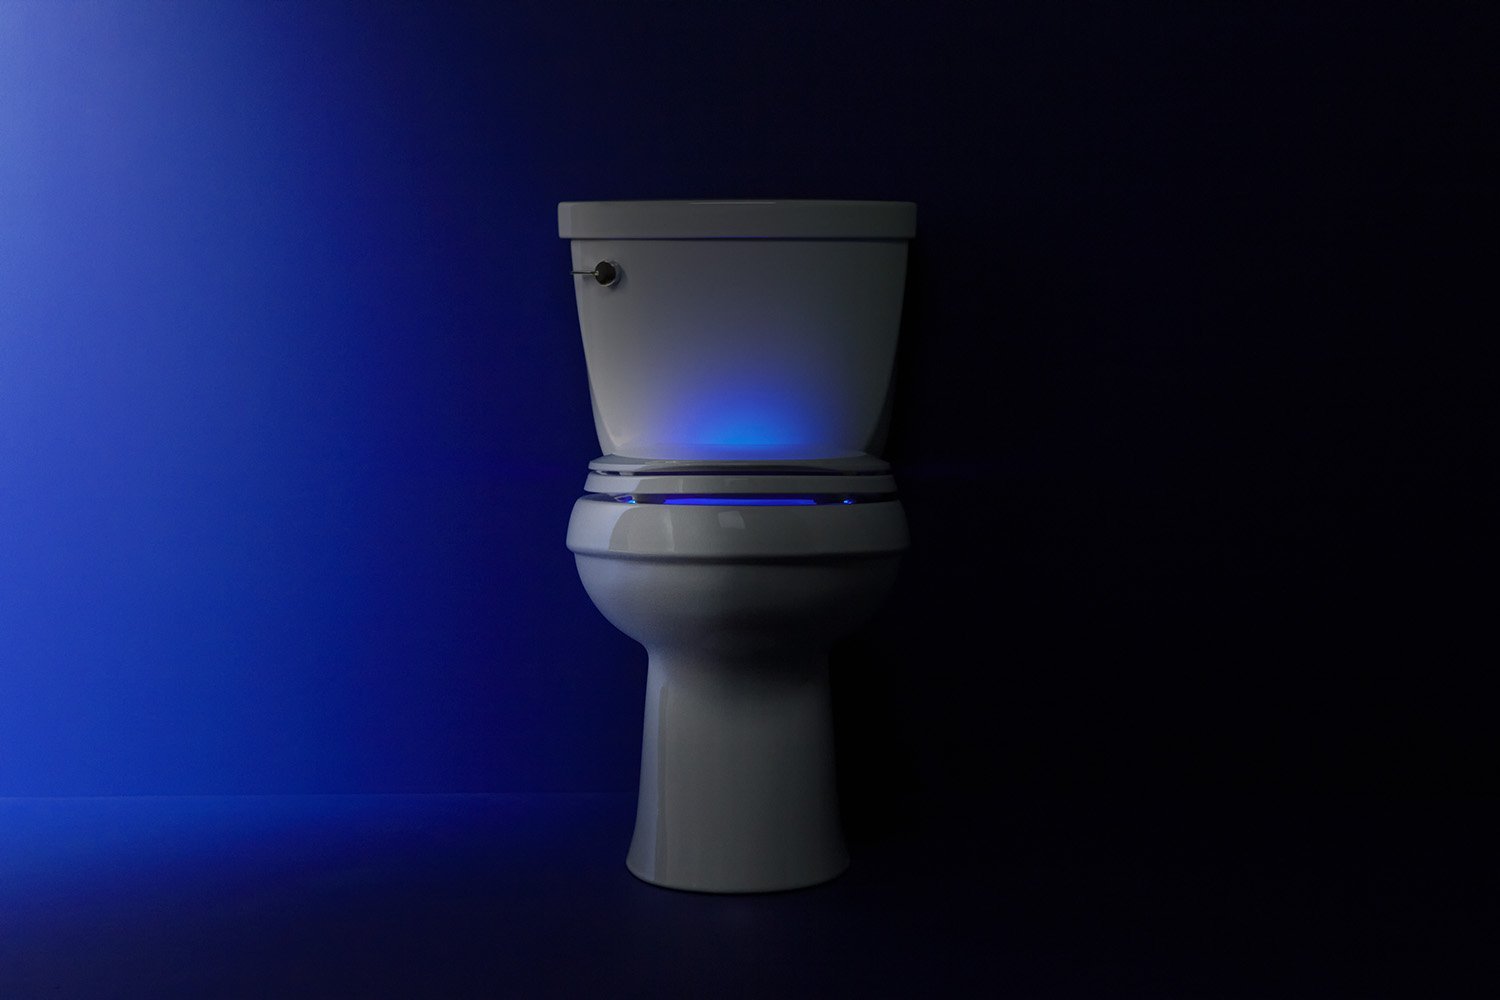 The Original Toilet Bowl Night Light Gadget Funny Led Motion Sensor  Presents For Seat Novelty Bathroom Accessory Gift Cool Fun 